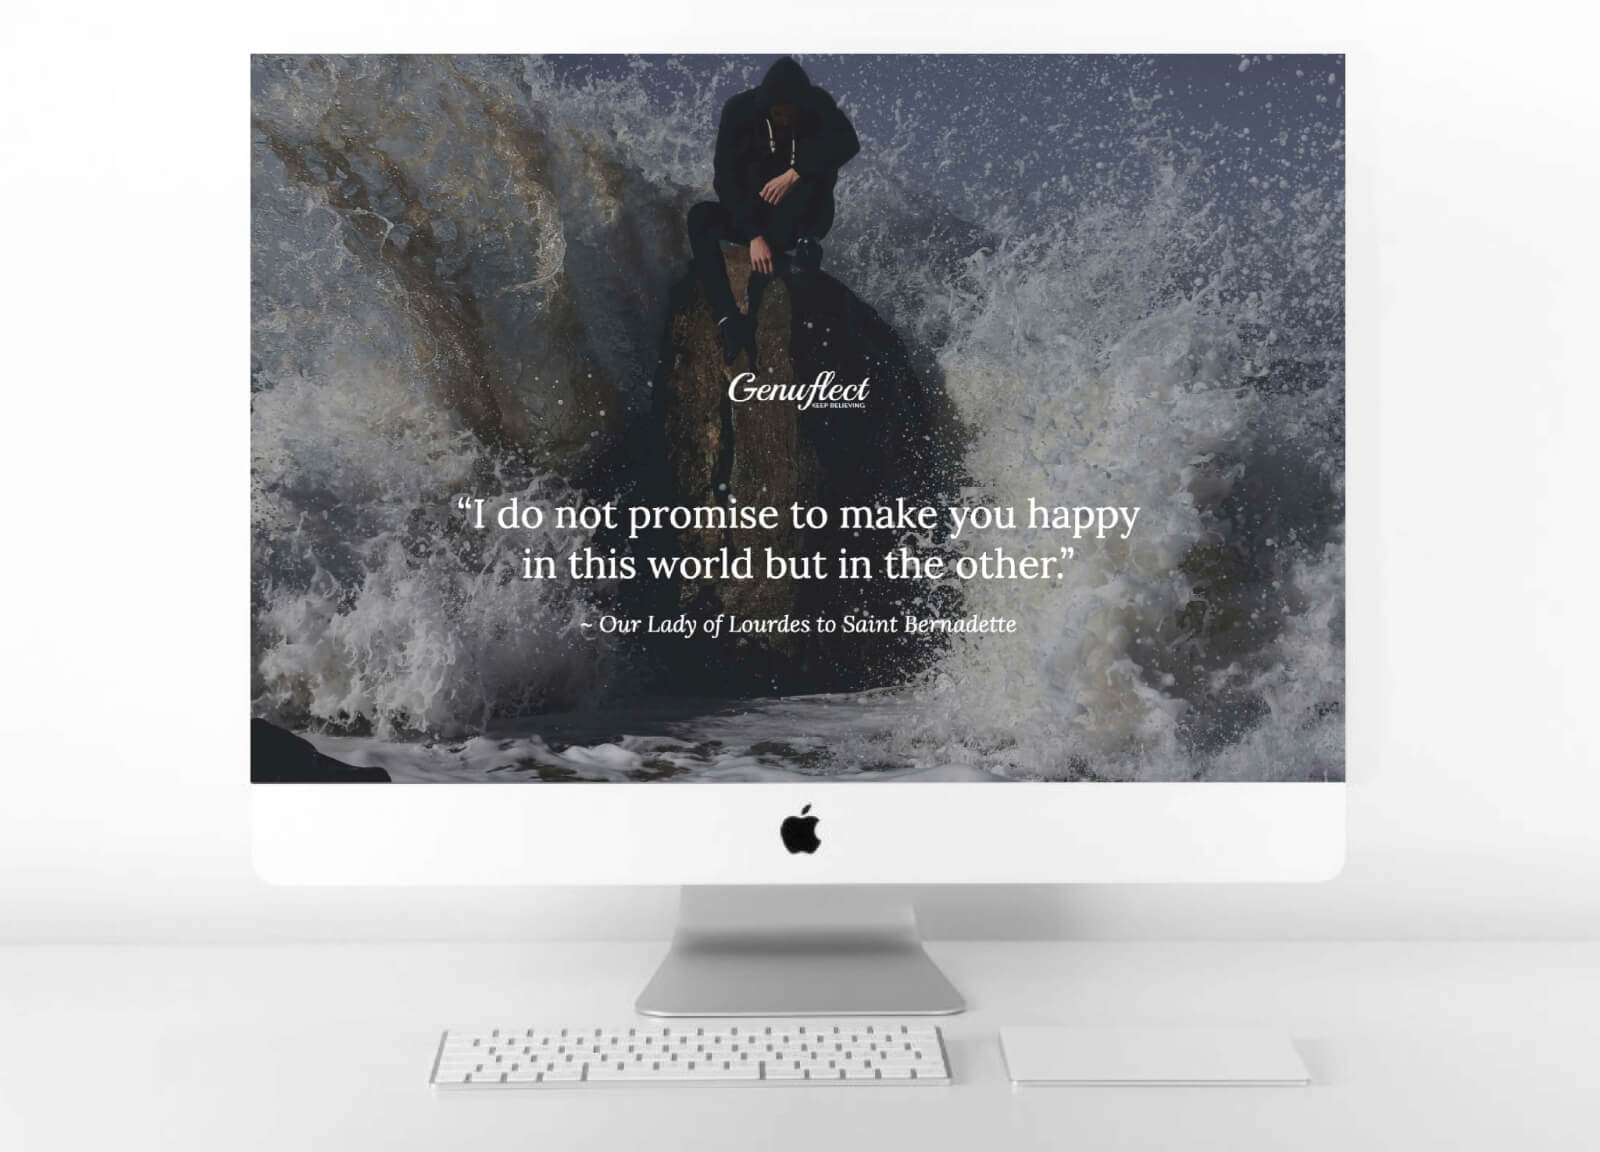 Genuflect computer background image of a Man in a hoodie sitting on a large rock with is head bowed down being hit with a large ocean wave